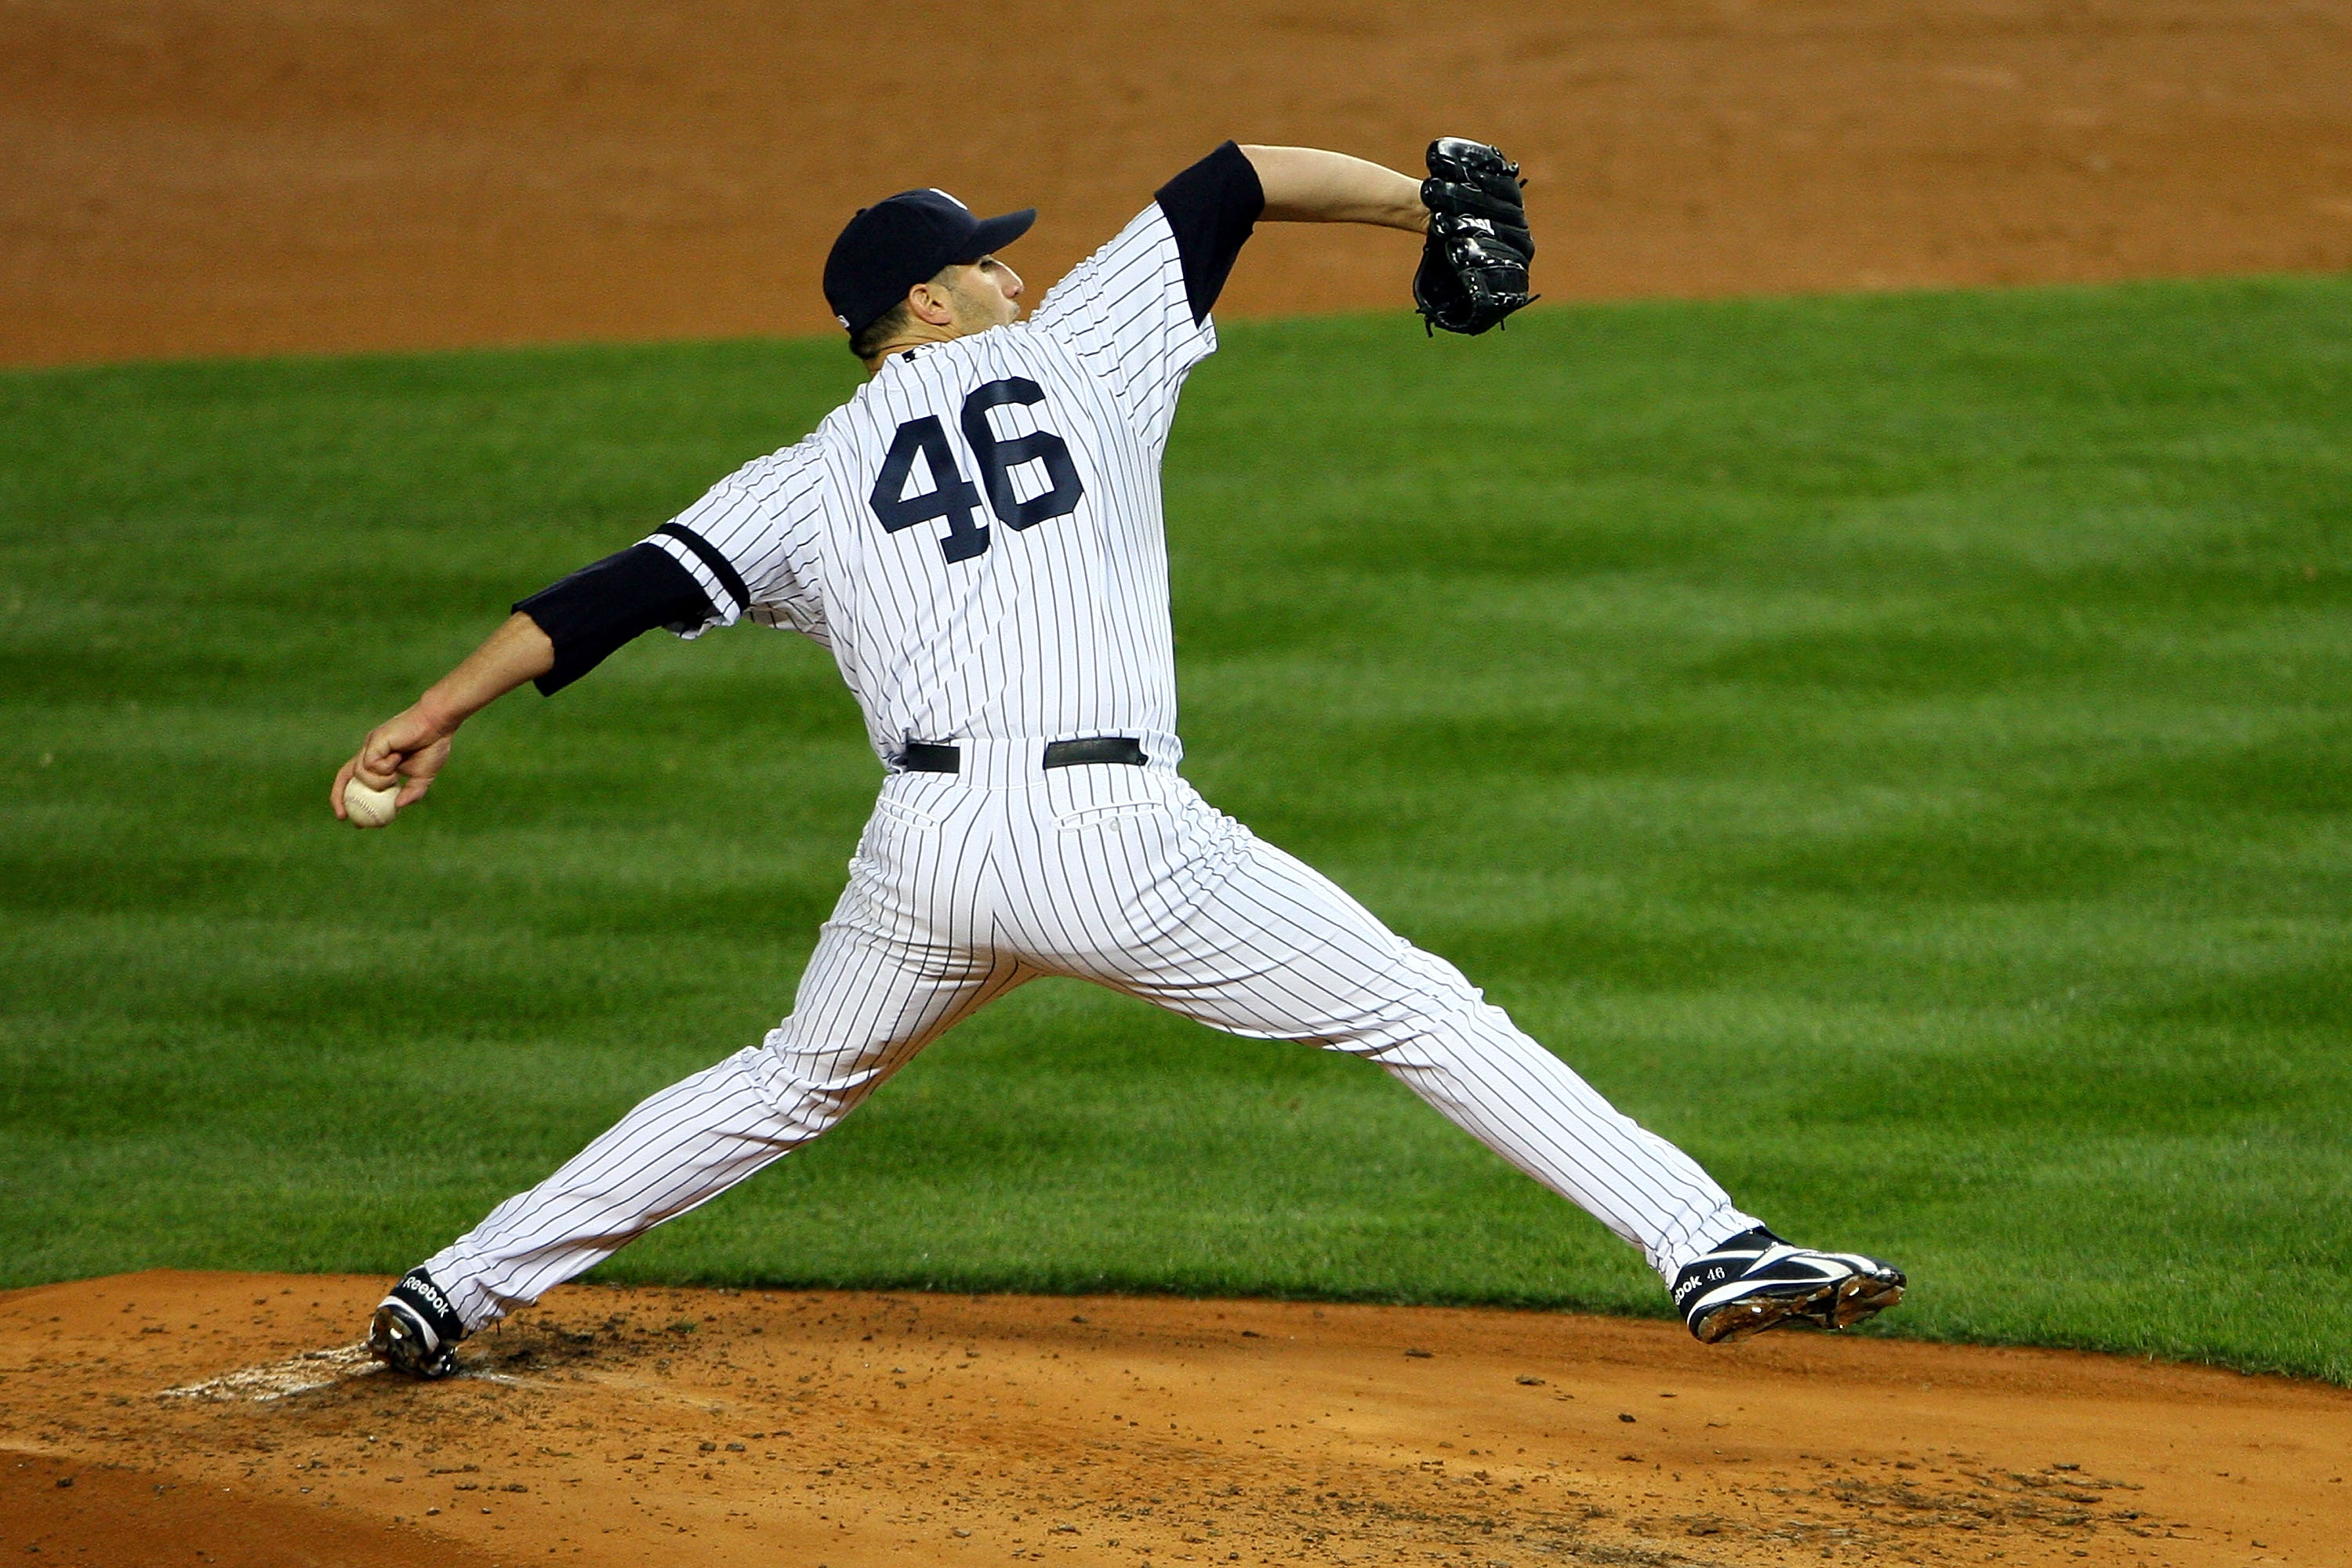 Andy Pettitte To Retire: 10 Reasons He Will Pull a Roger Clemens